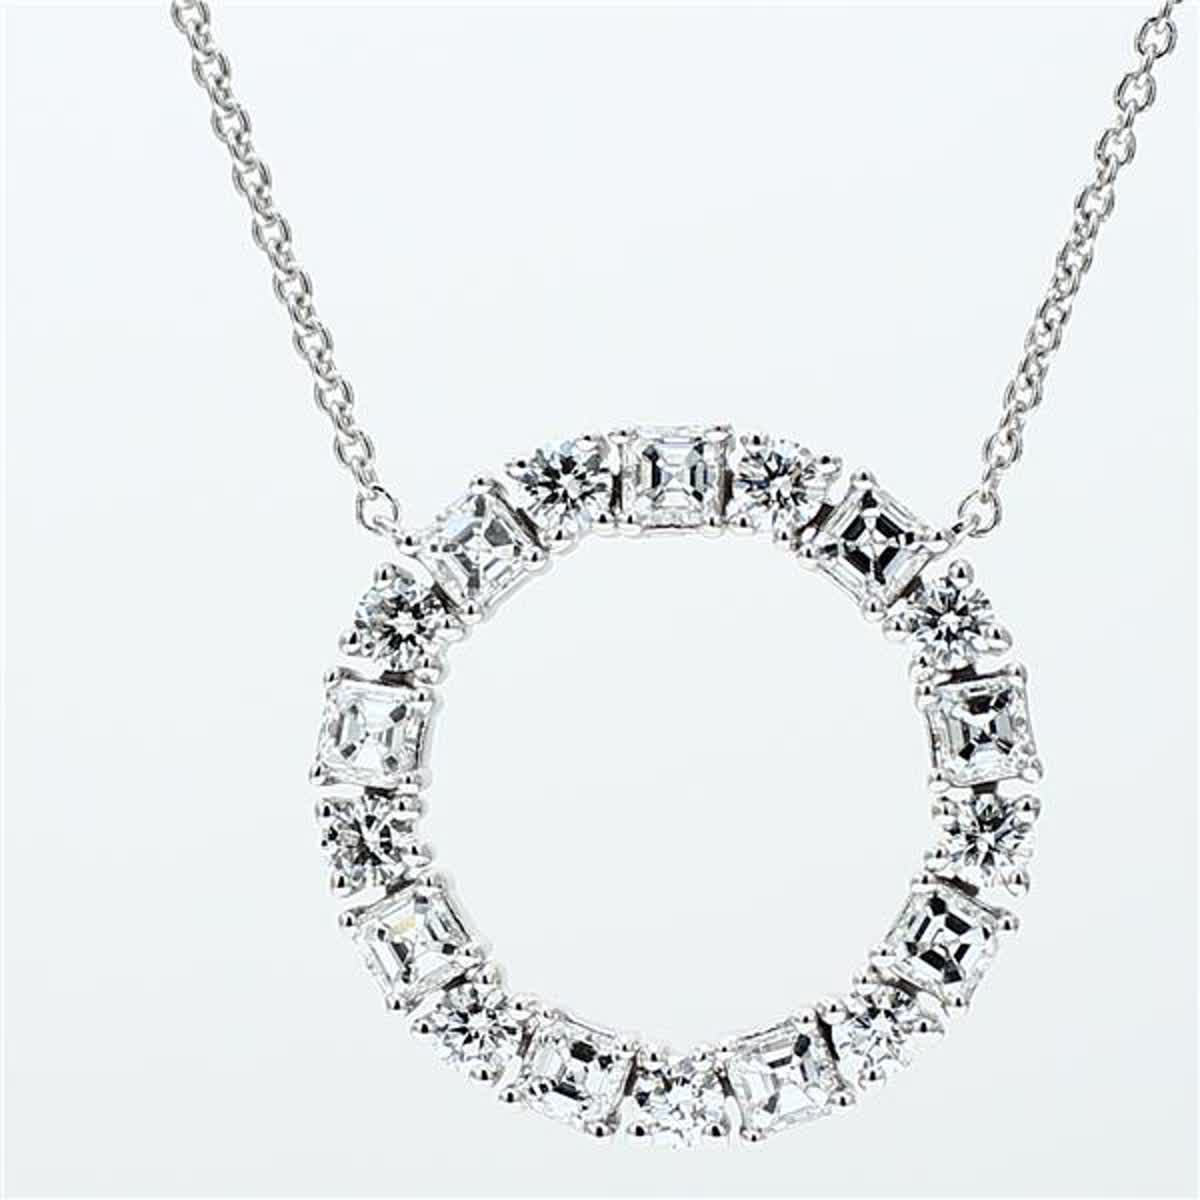 Natural White Radiant and Round Diamonds 1.35 Carat TW White Gold Necklace